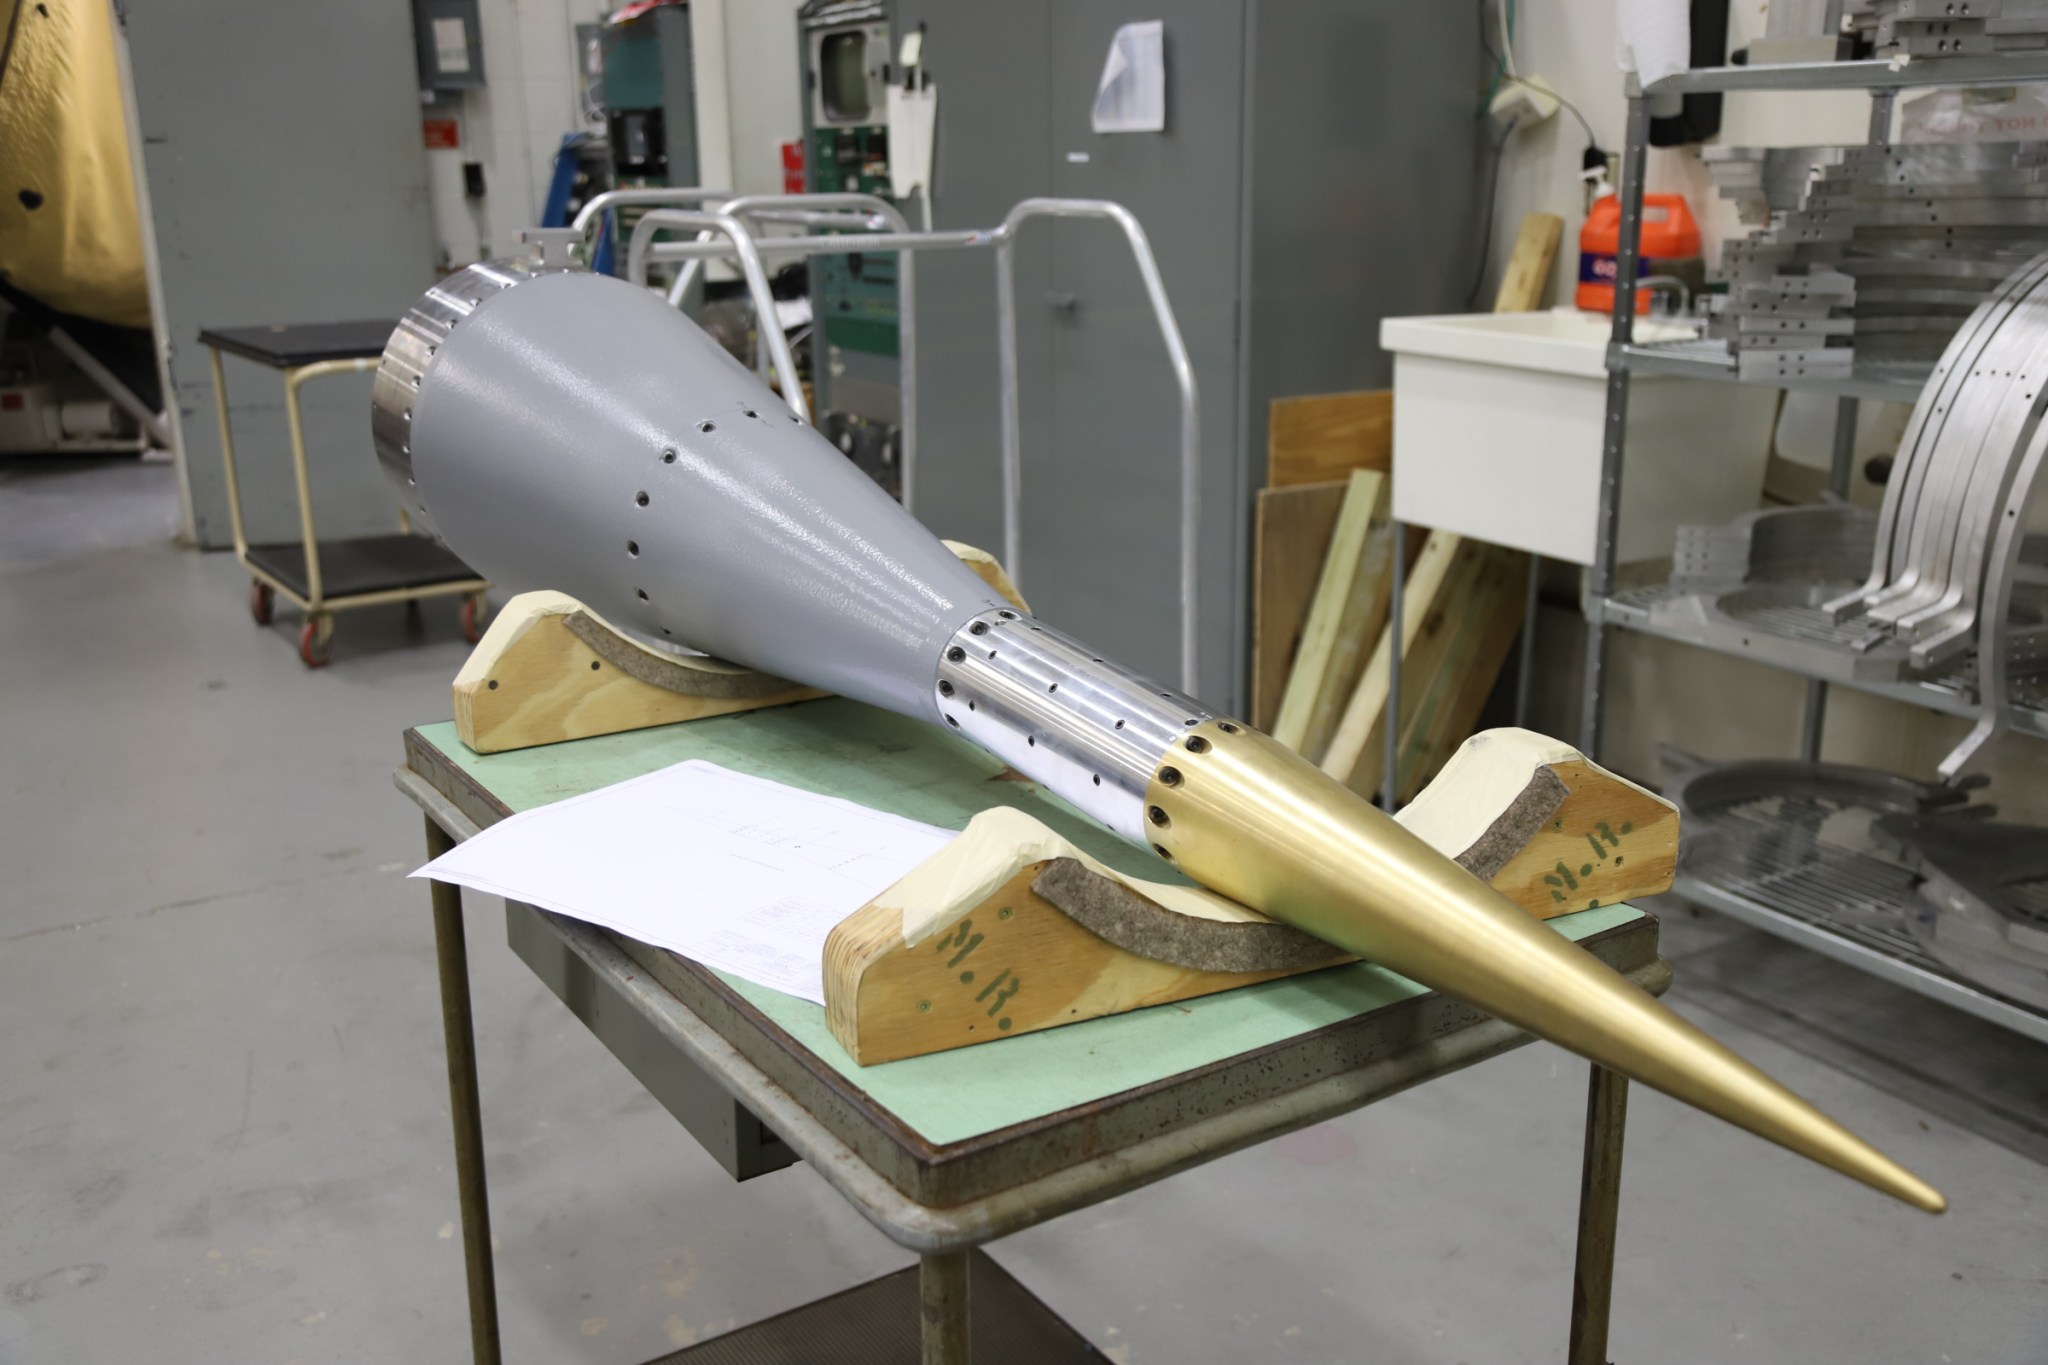 The payload section of a sounding rocket propped up on a table. The payload is mostly grey on the larger section and gets small to a golden pointed end. 